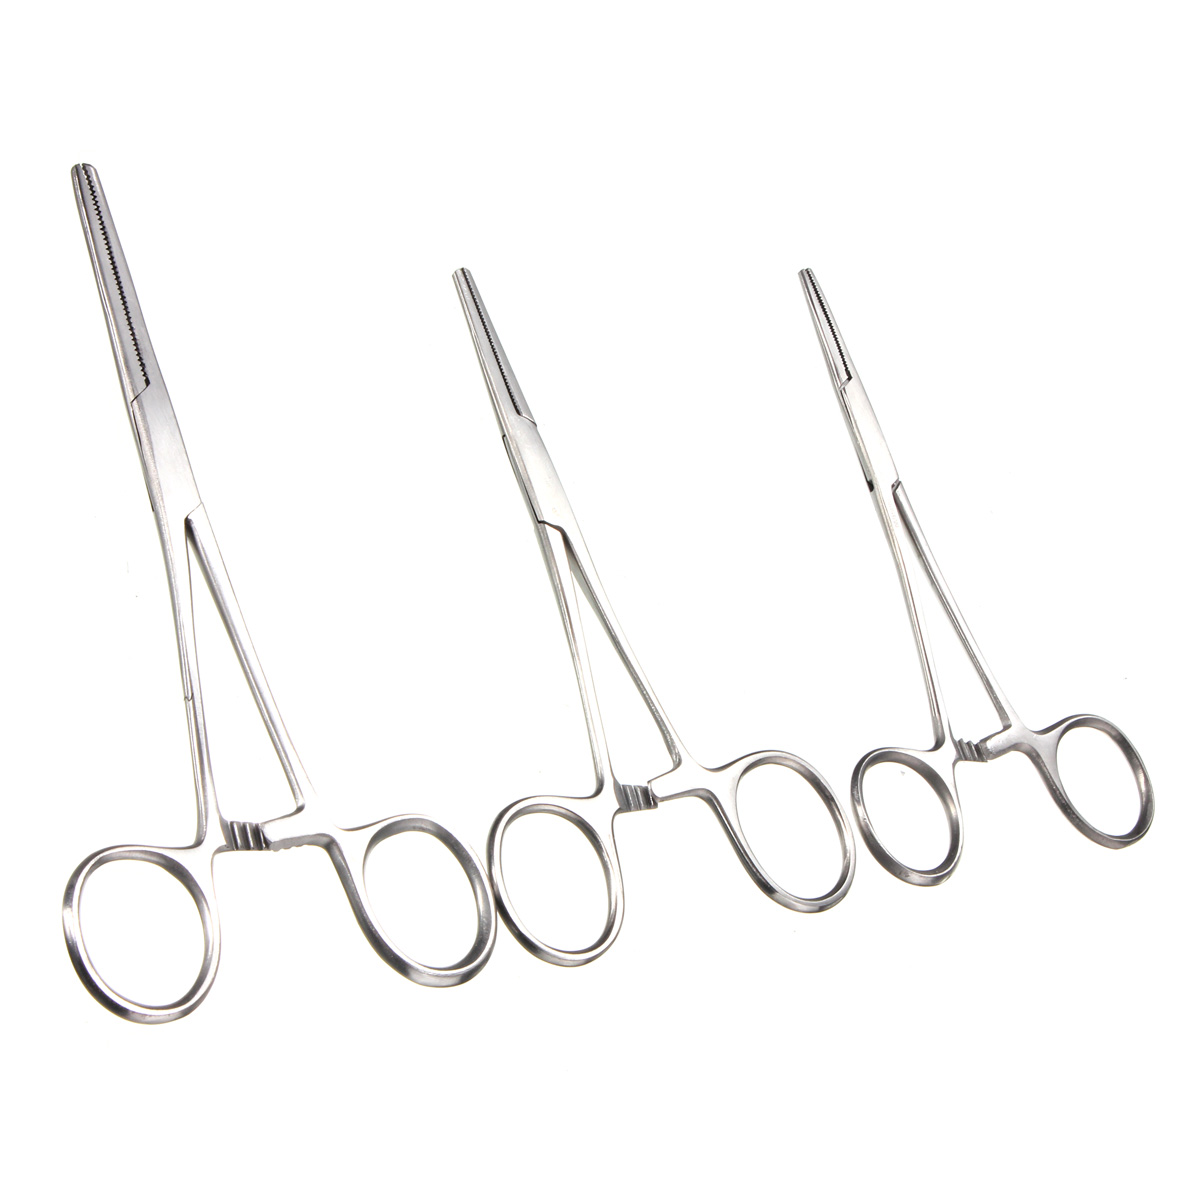 Hemostat-Forceps-Straight-Curved-Stainless-Steel-Locking-Clamp-1039903-1